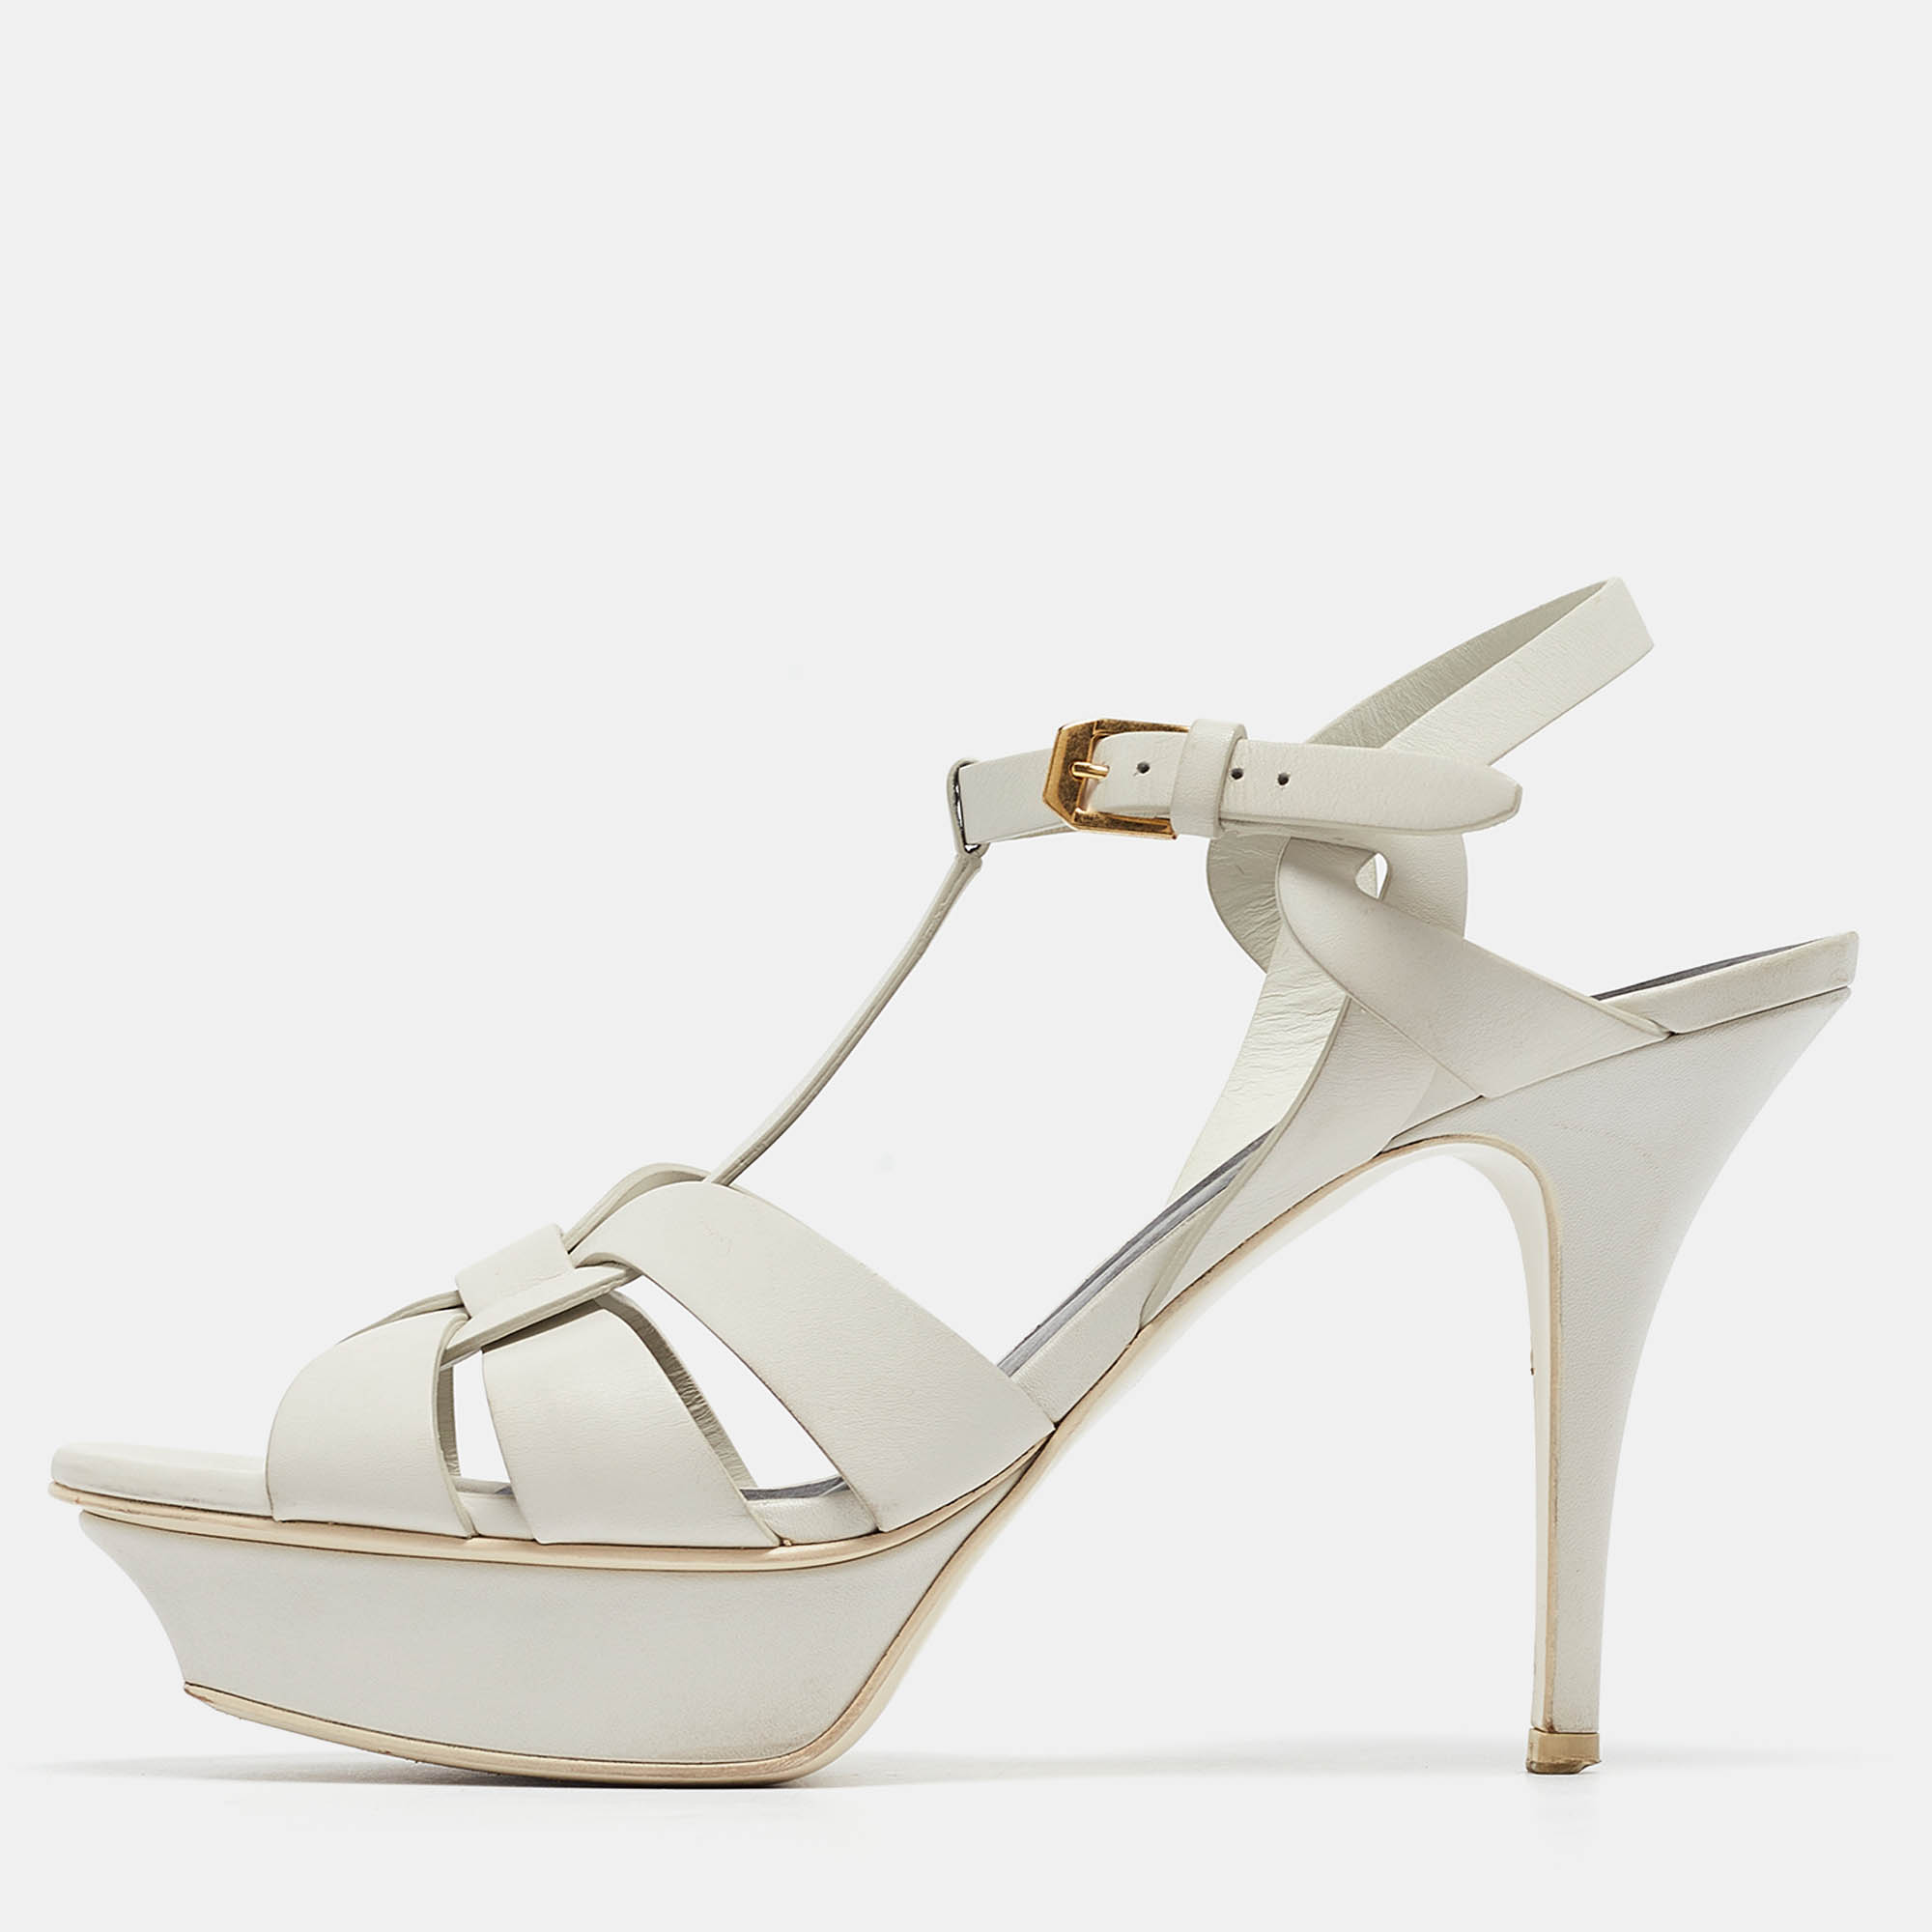 Yves saint laurent white leather tribute sandals size 40